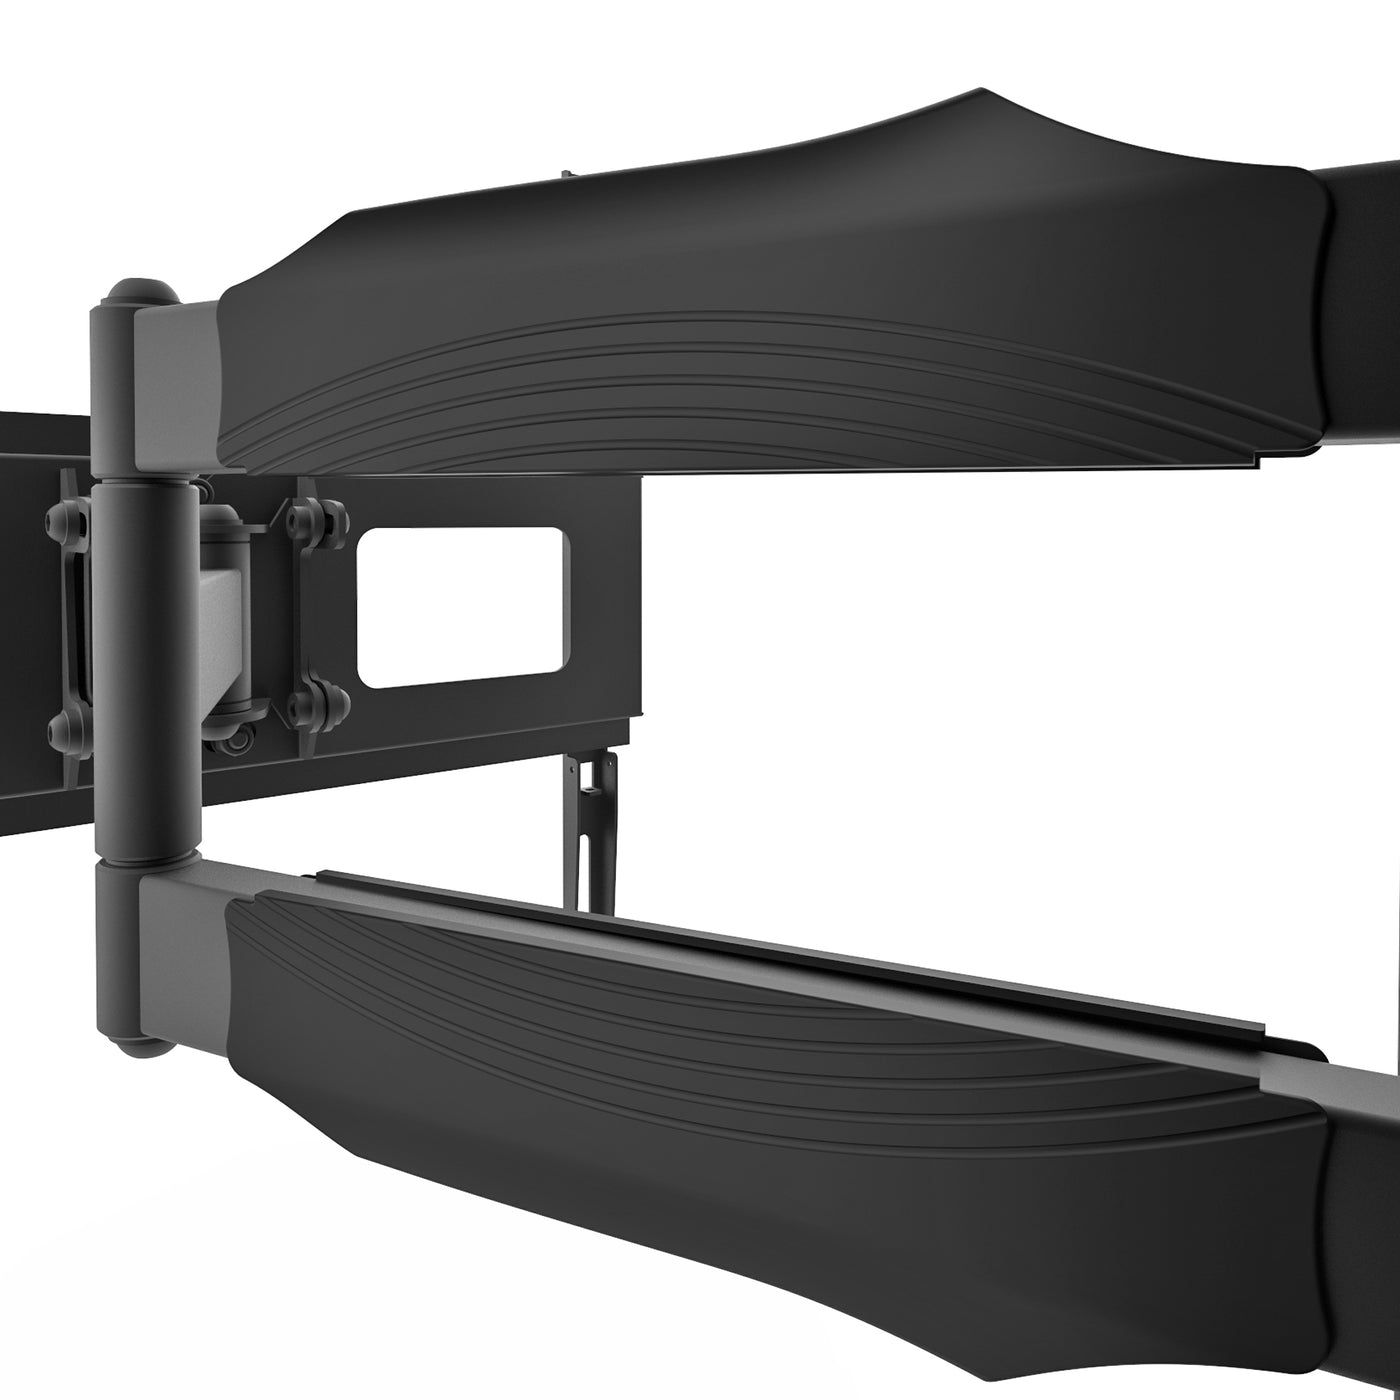 Low Profile Recessed In-Wall Full Motion TV Wall Mount for 32" to 55" TVs - R300